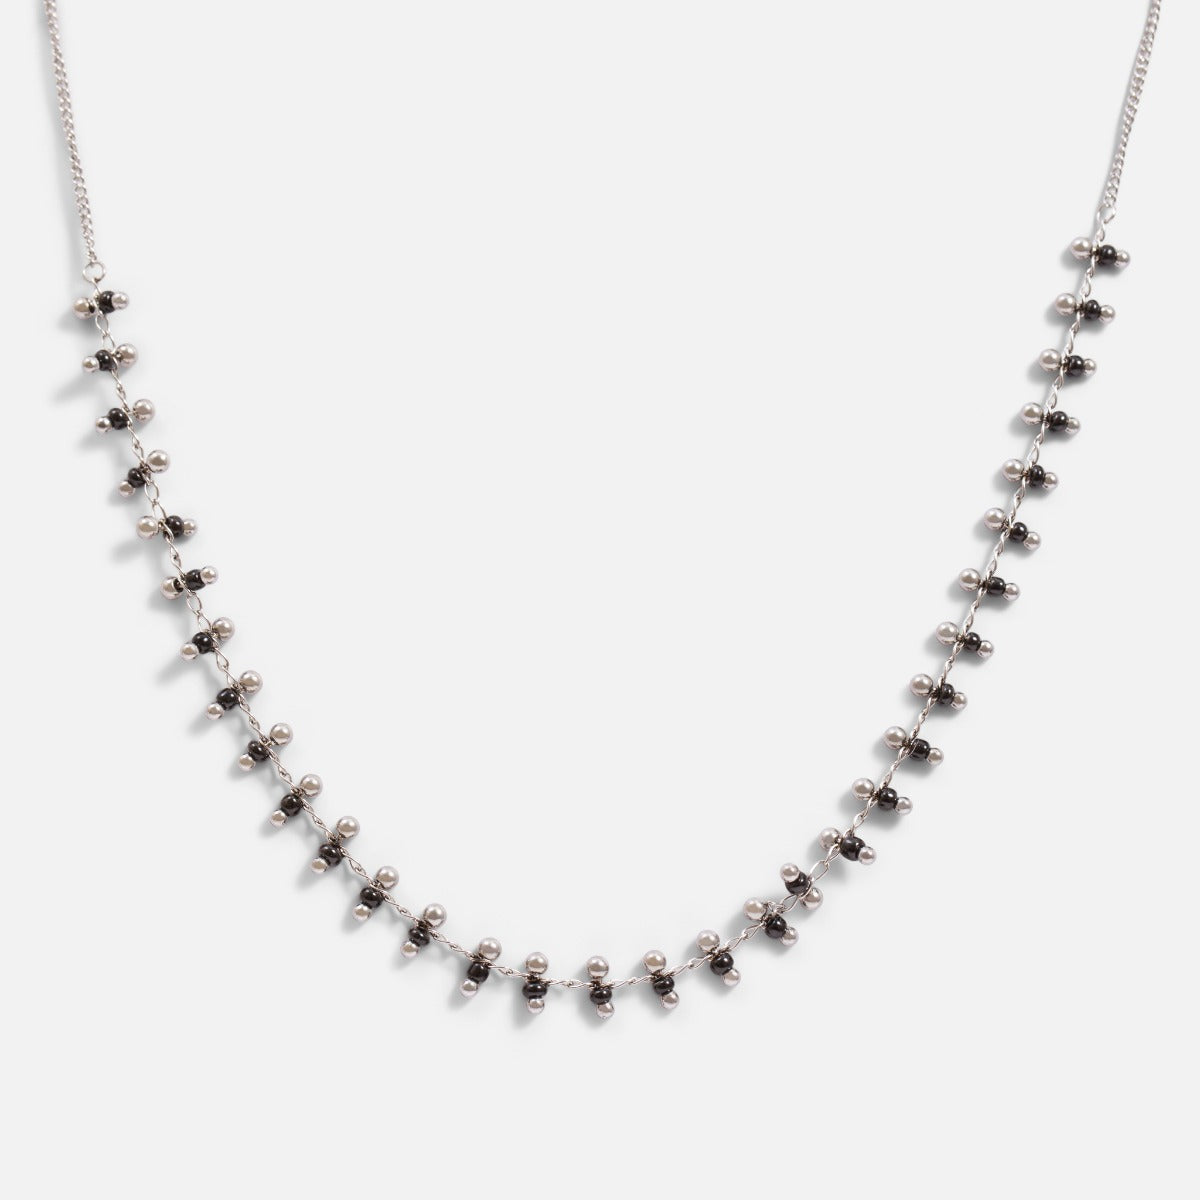 Silvered stainless steel necklace with black beads